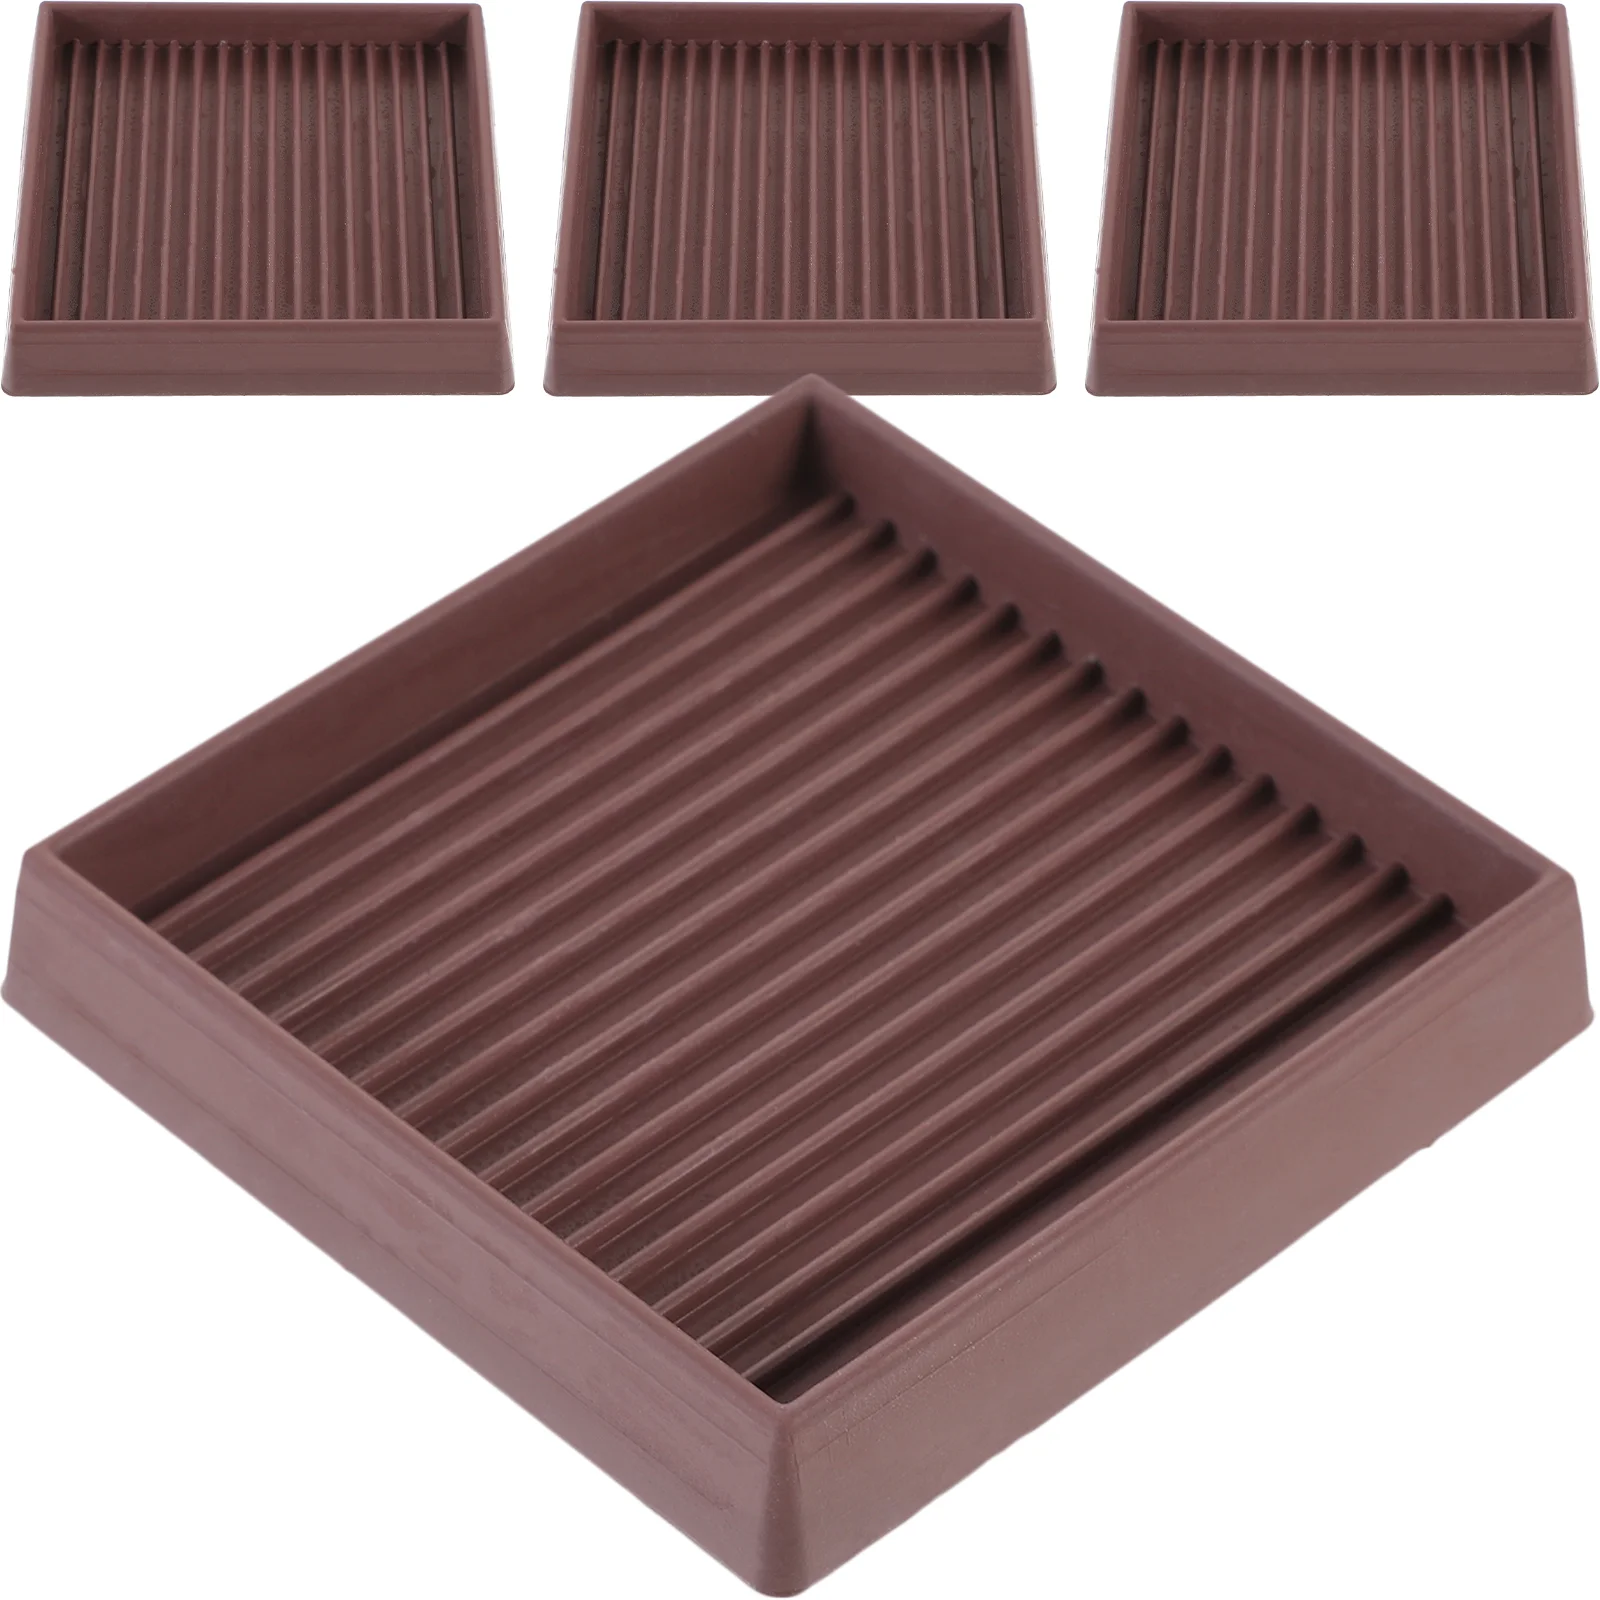 

4 Pcs Slide Pad Furniture Pads Floor Protectors for Caster Cups Nonslip Chair Leg Plastic Hardwood Floors Bed Stoppers